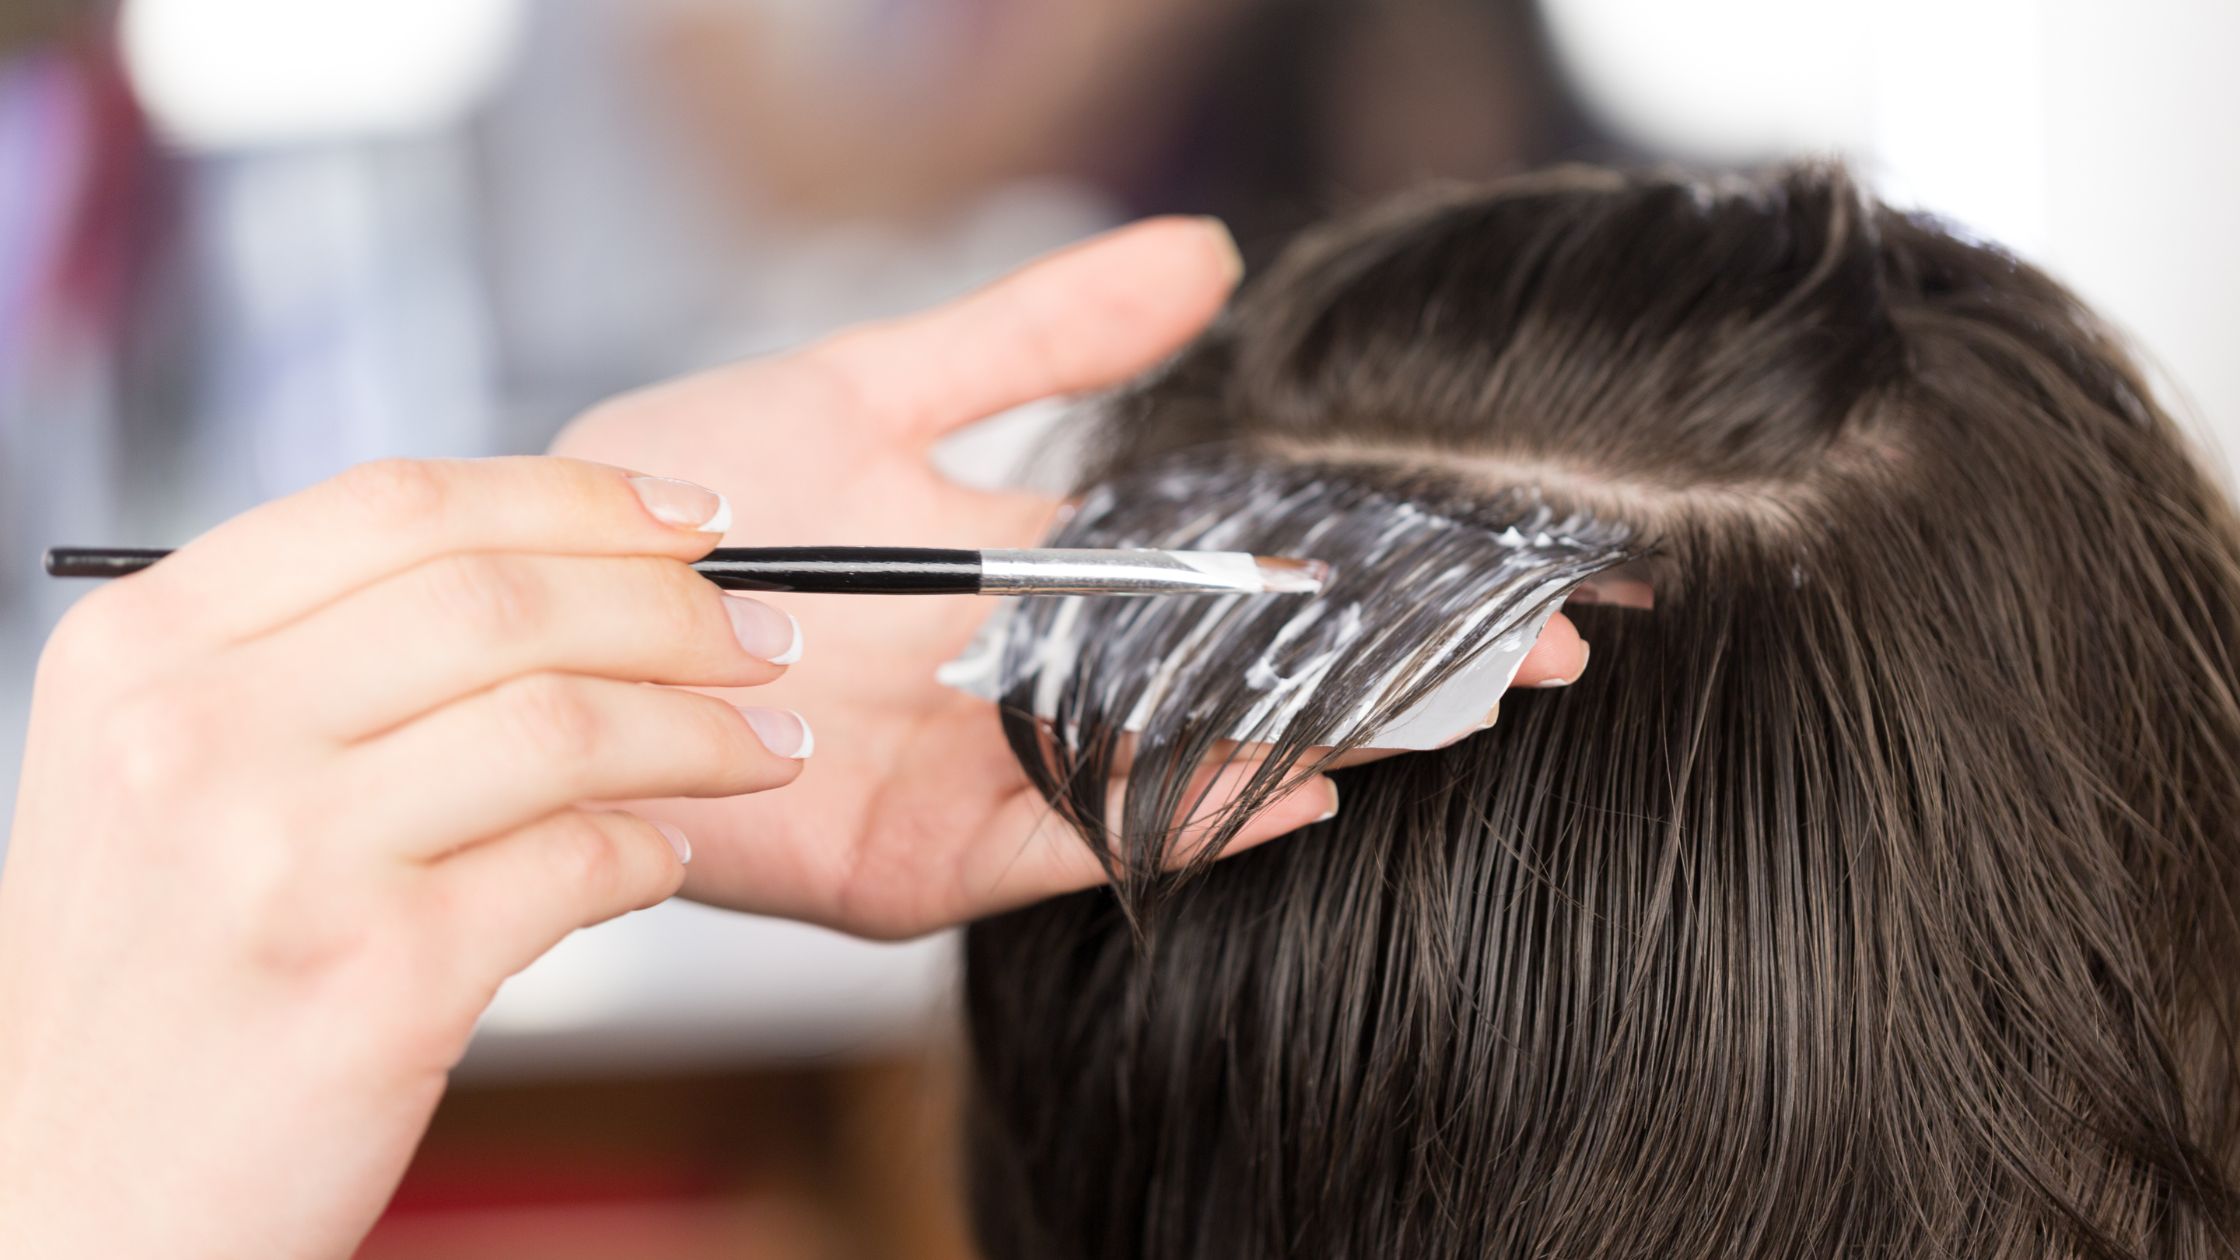 how to remove hair dye from nails and skin